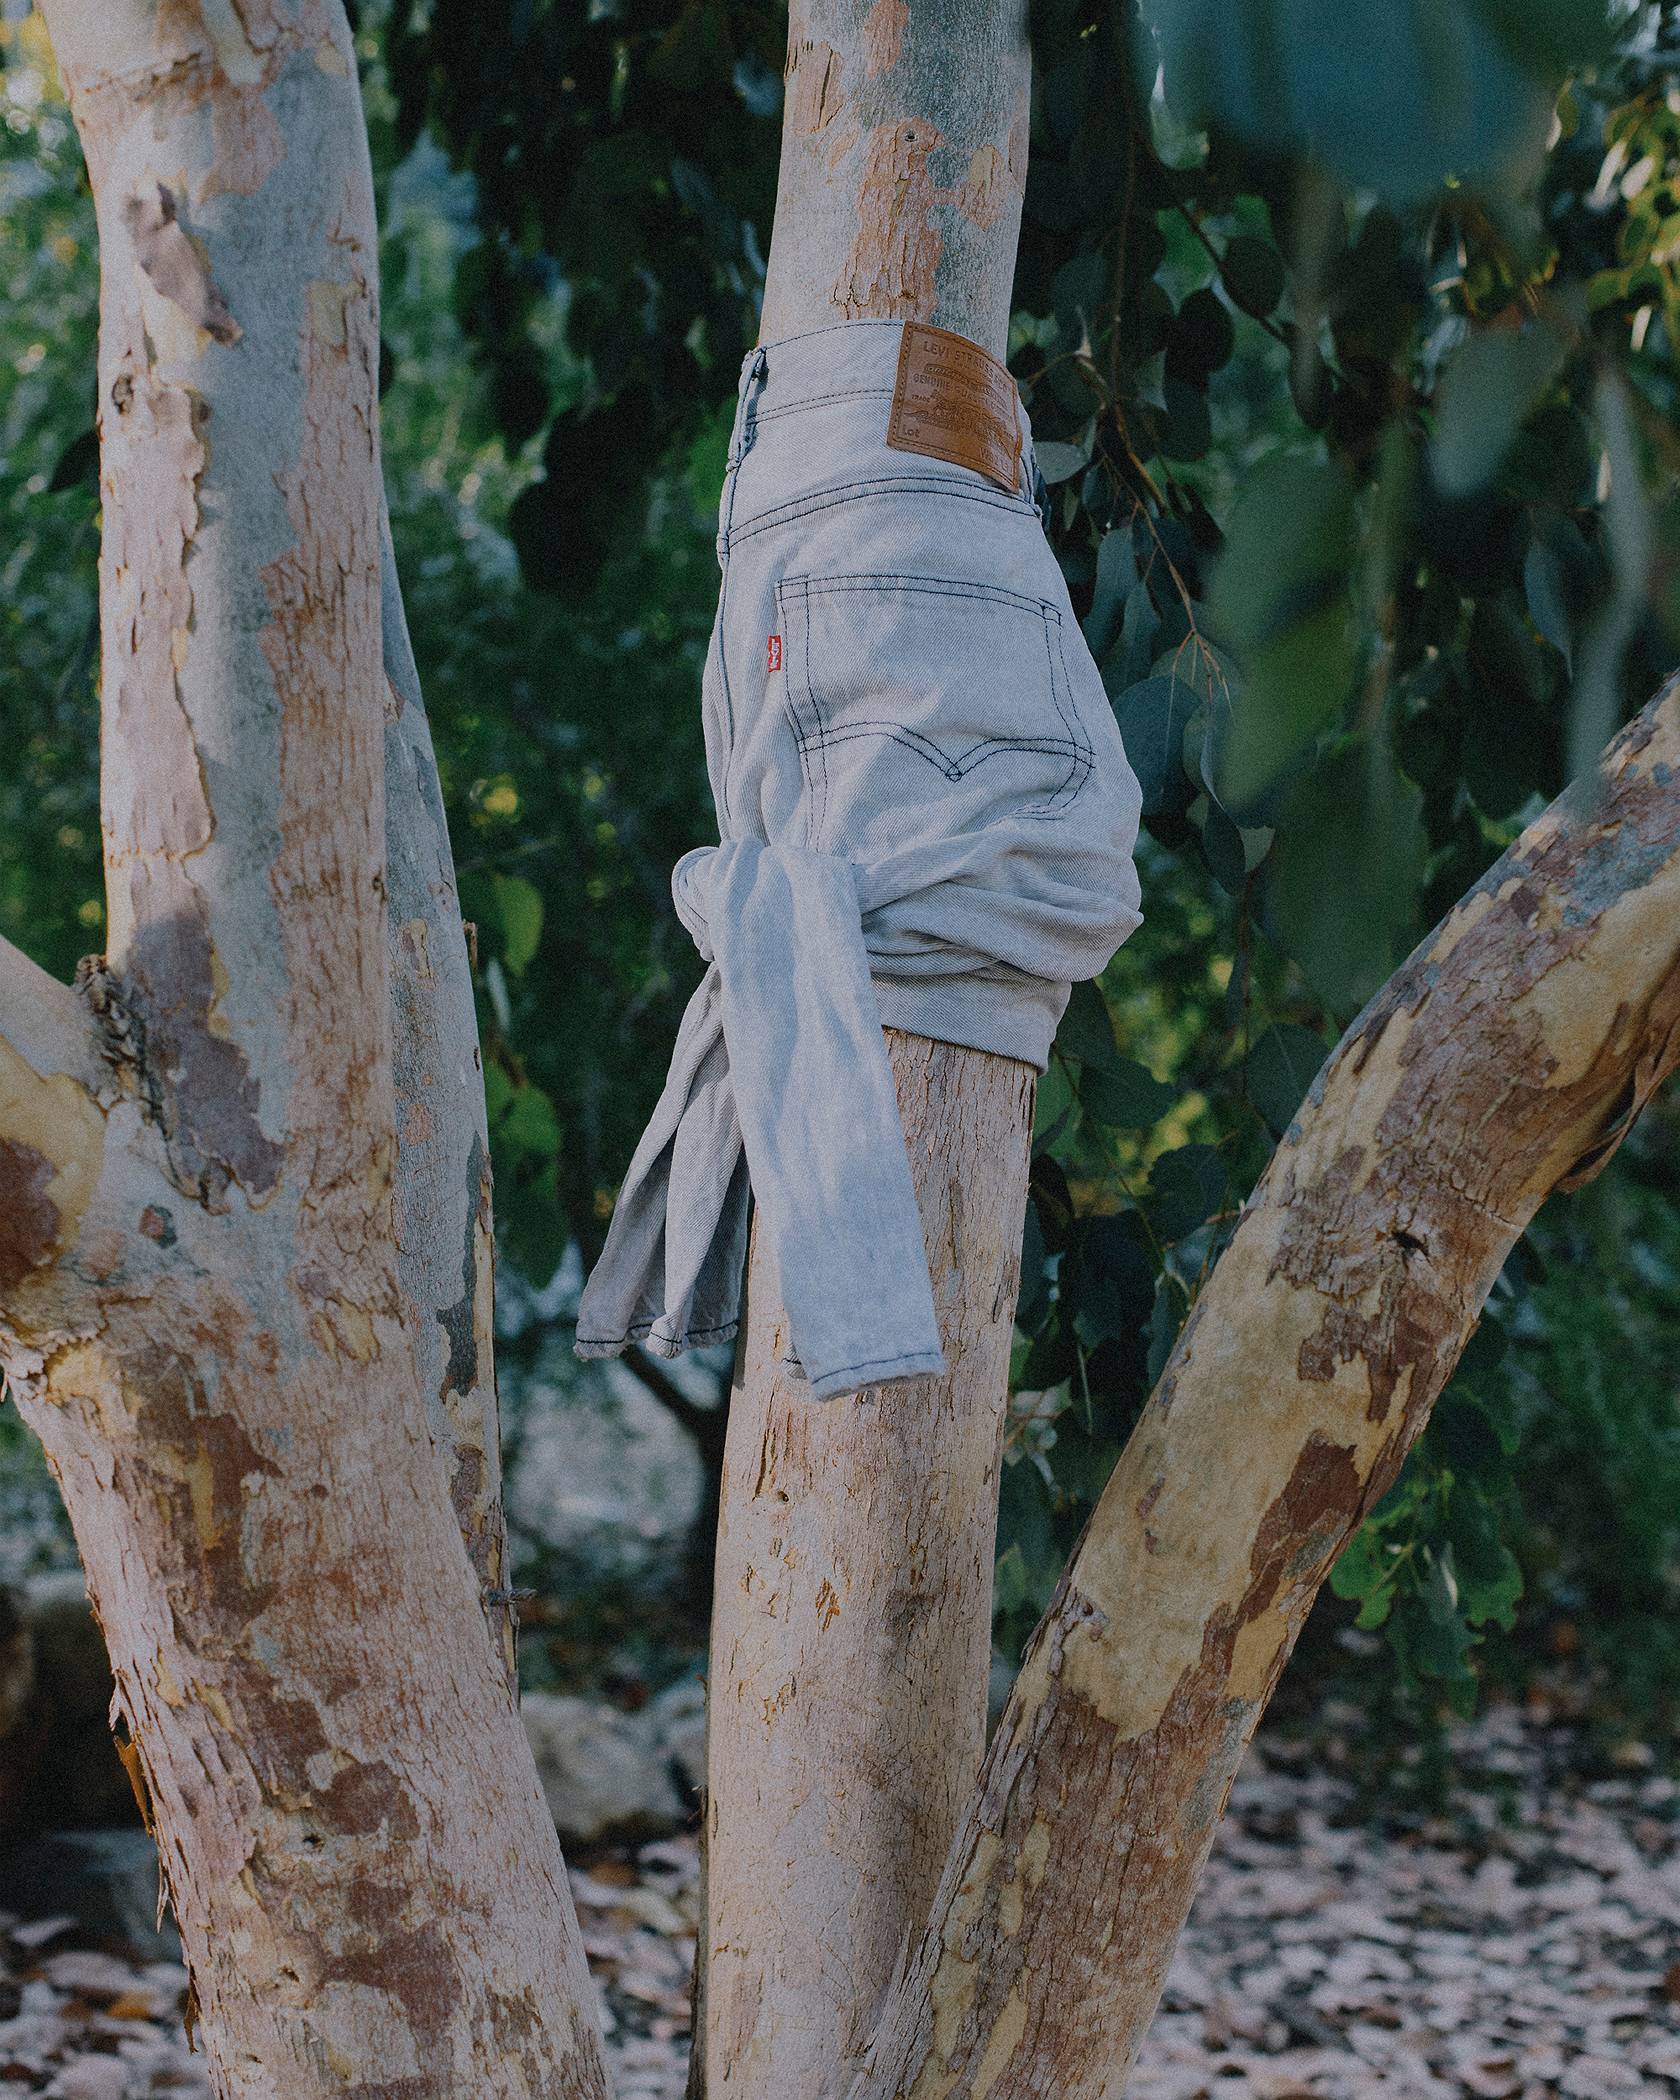 jeans hanging in a tree